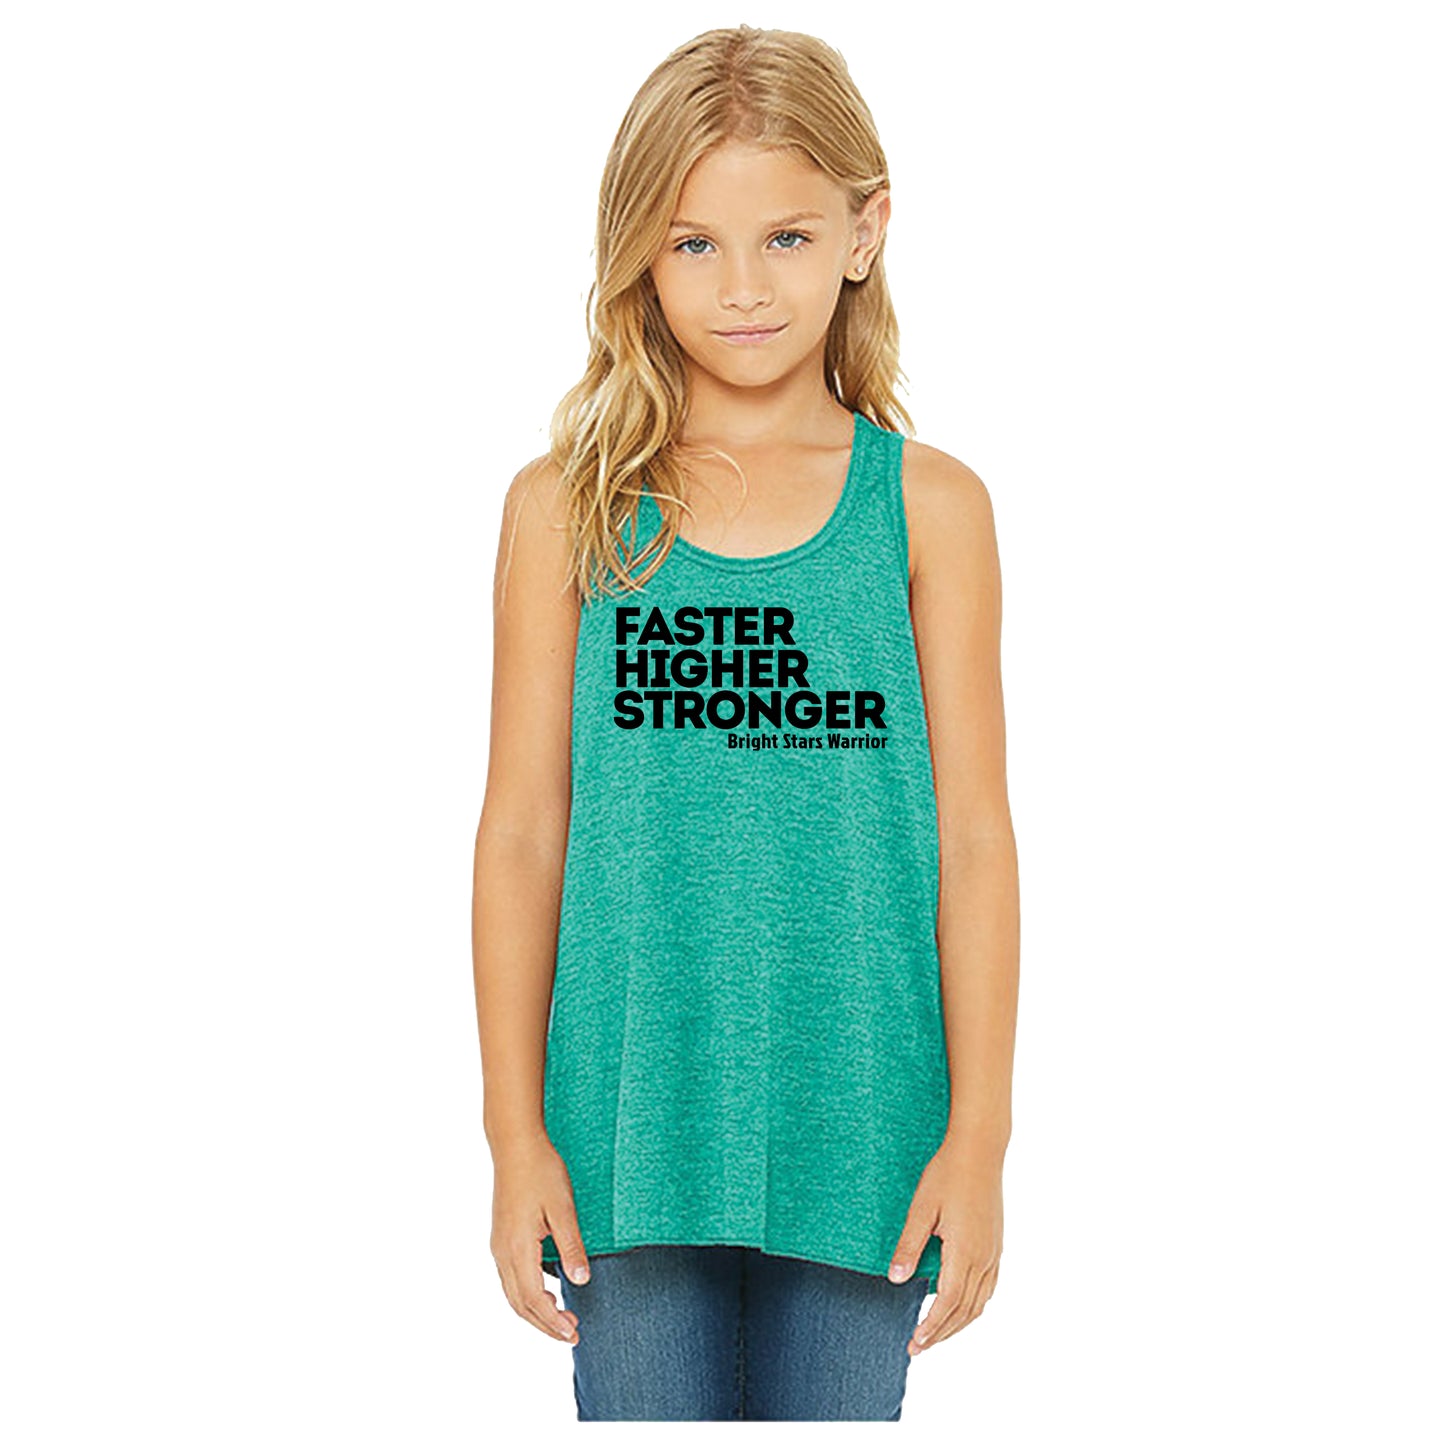 BRIGHT STARS GYMNASTICS ACADEMY | YOUTH TEAL FLOWY TANK | FASTER HIGHER STRONGER